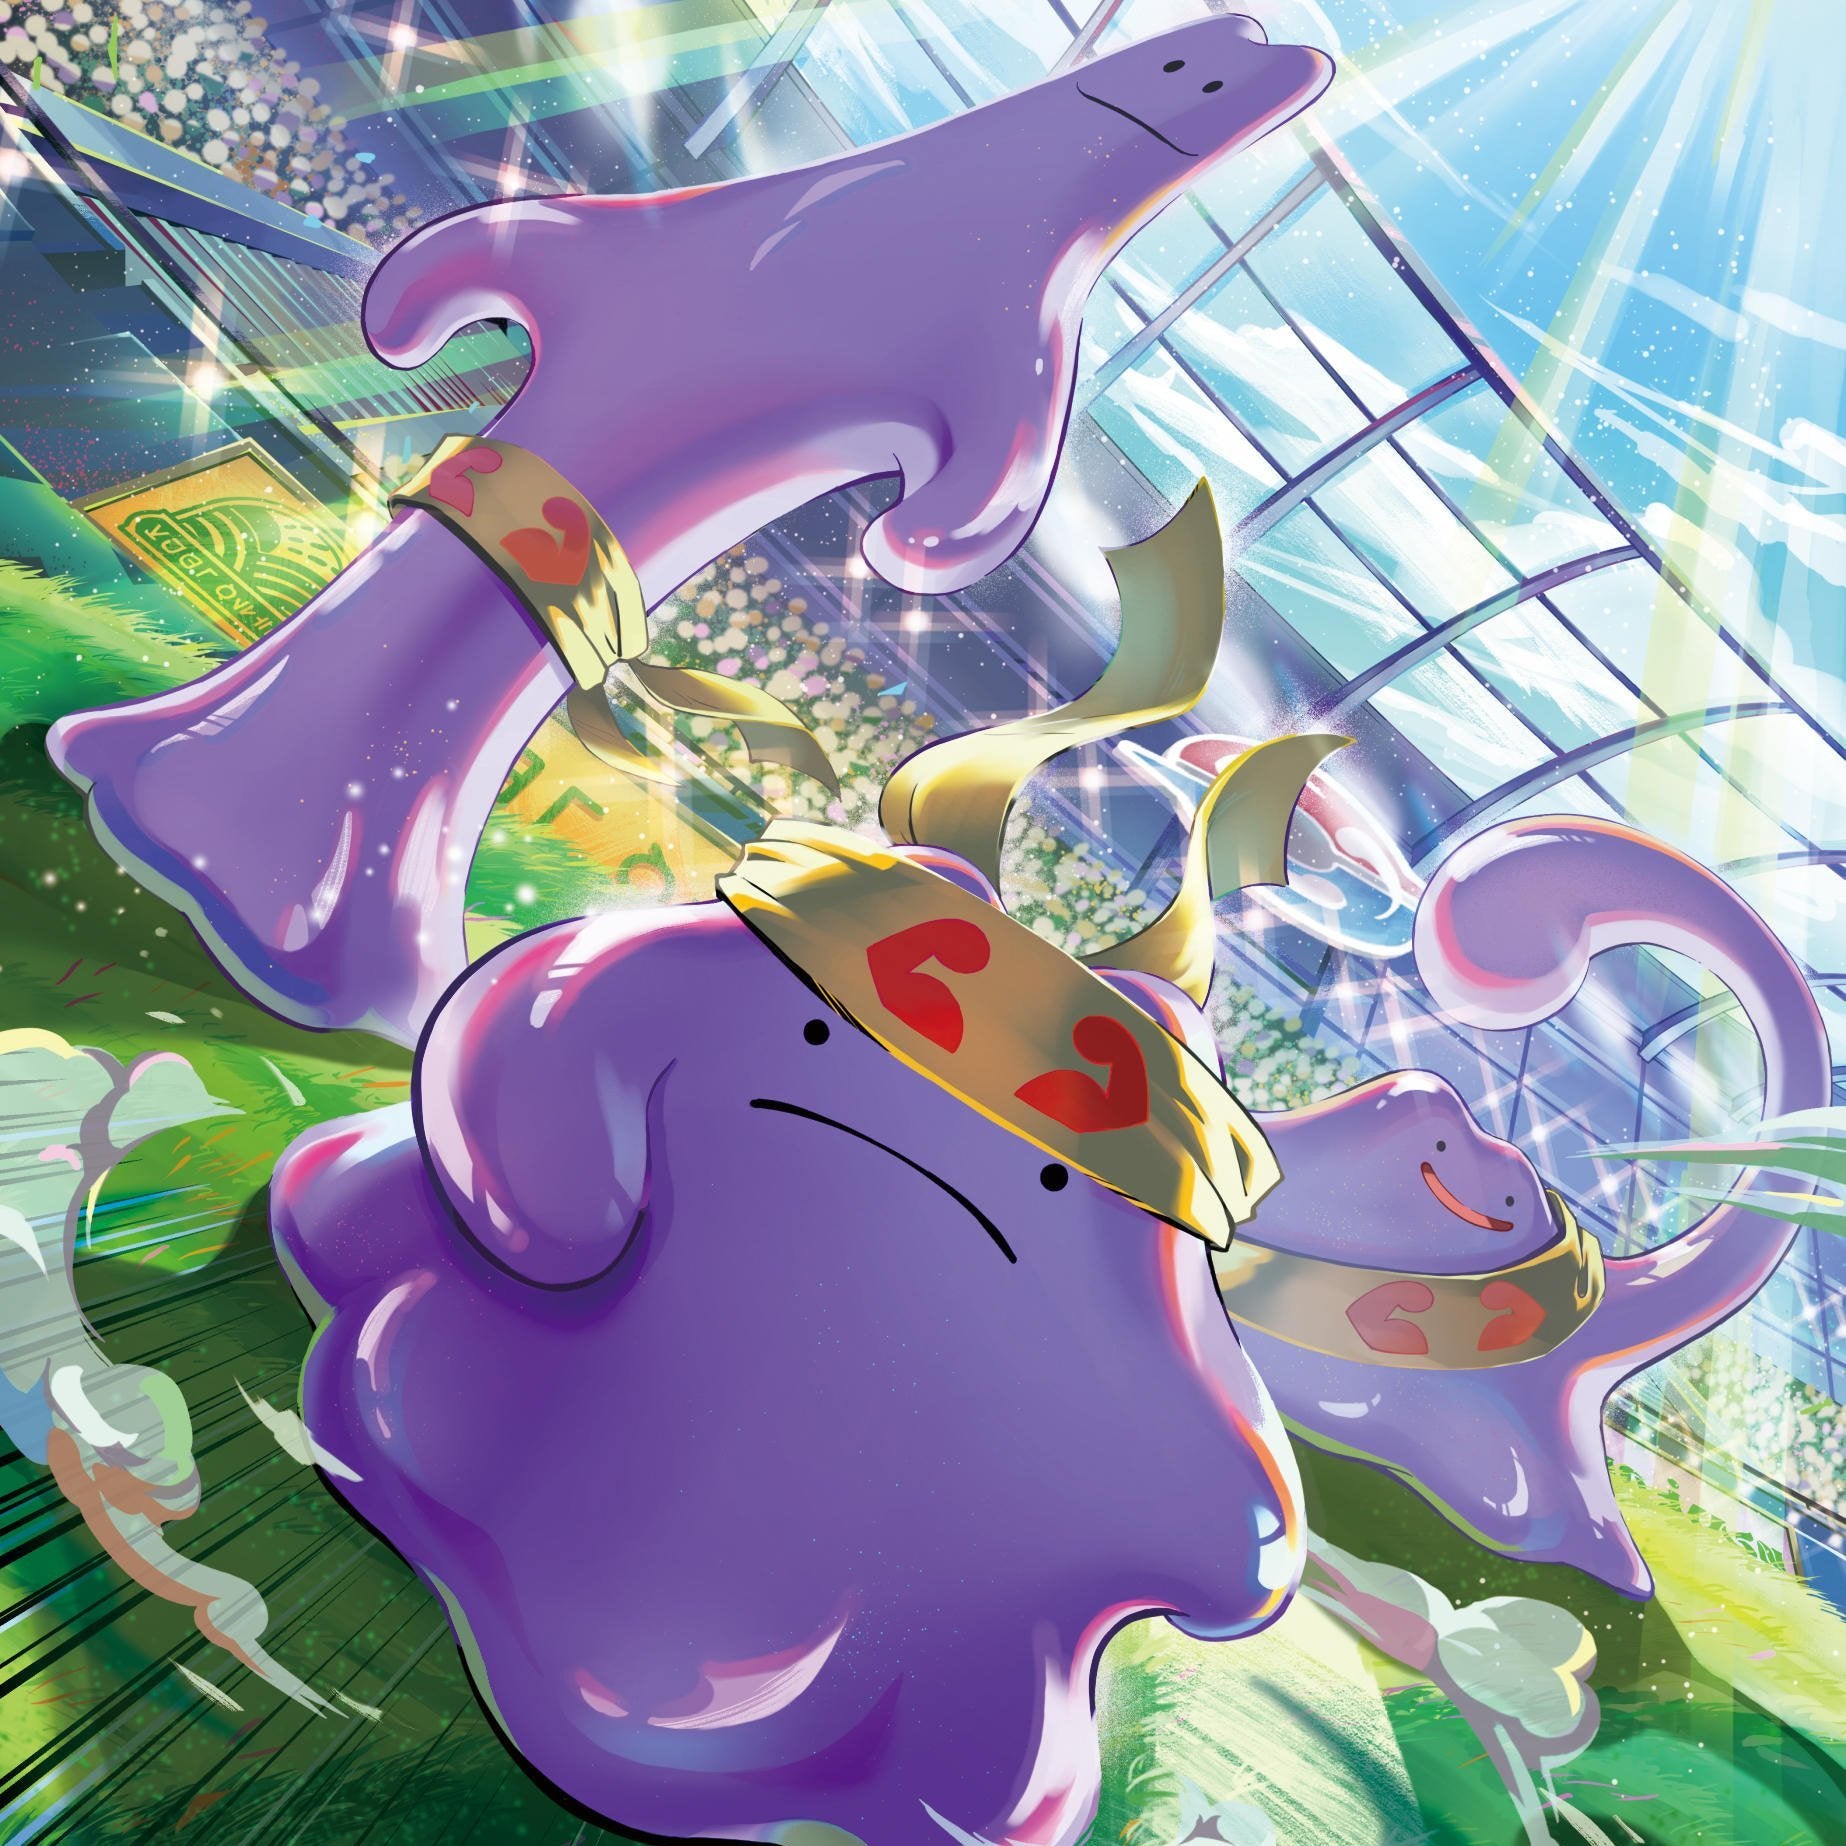 Pokémon TCG: Ditto As D-Ring Binder - 1 In.